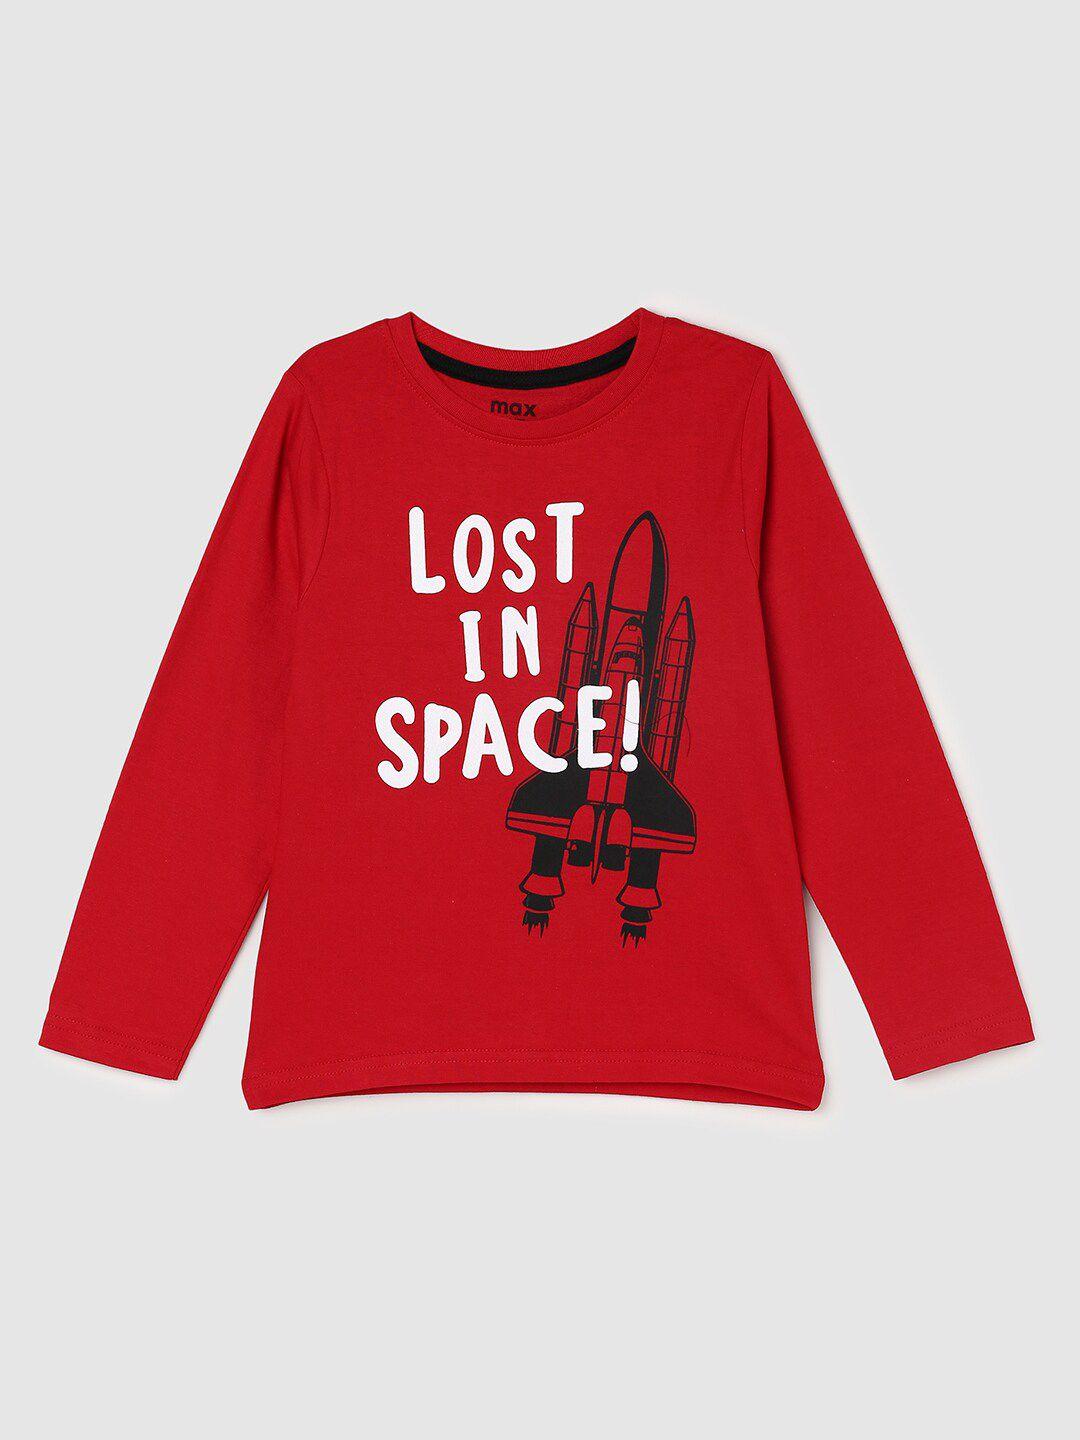 max boys red typography printed applique t-shirt